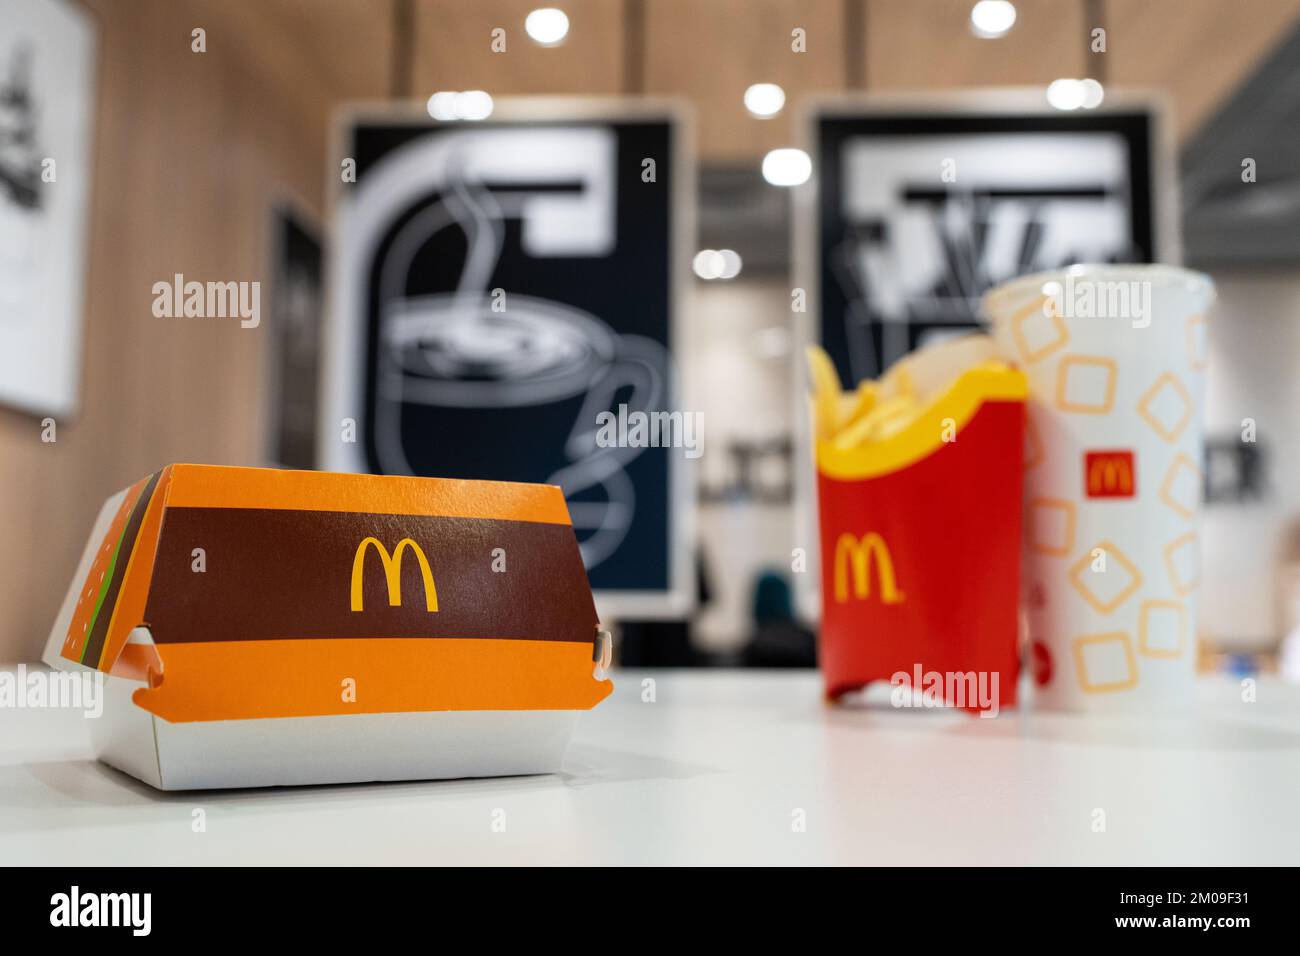 Big Mac Box with McDonald's logo, French Fries and soft drink on table in McDonald's Restaurant. Stock Photo